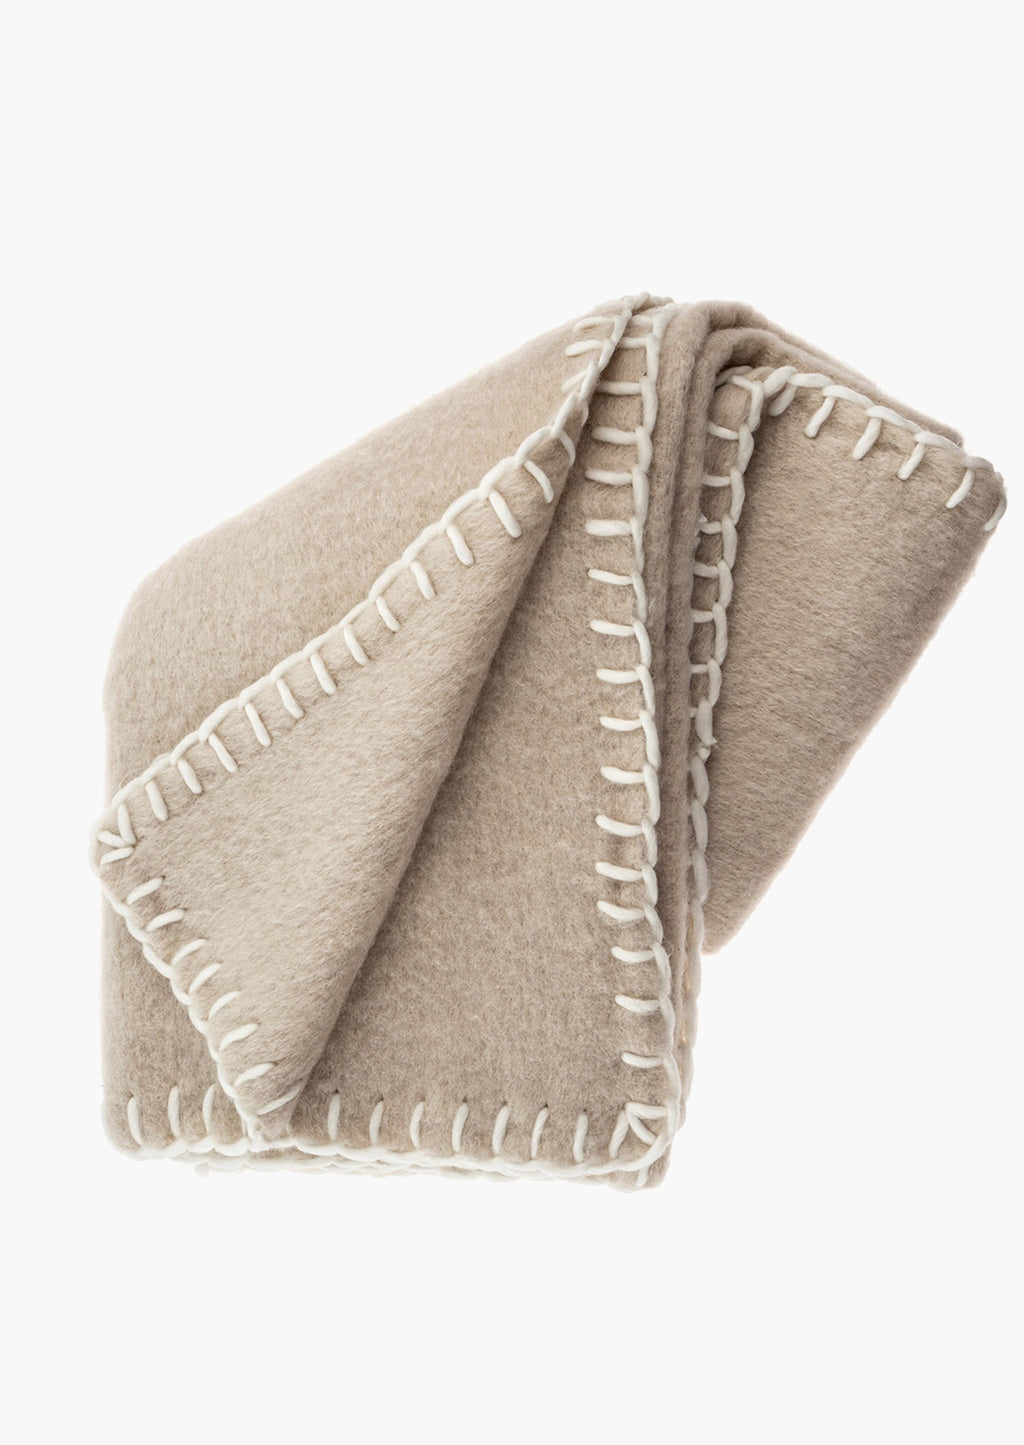 Oat: A beige mohair blanket with white yarn whipstitched trim.